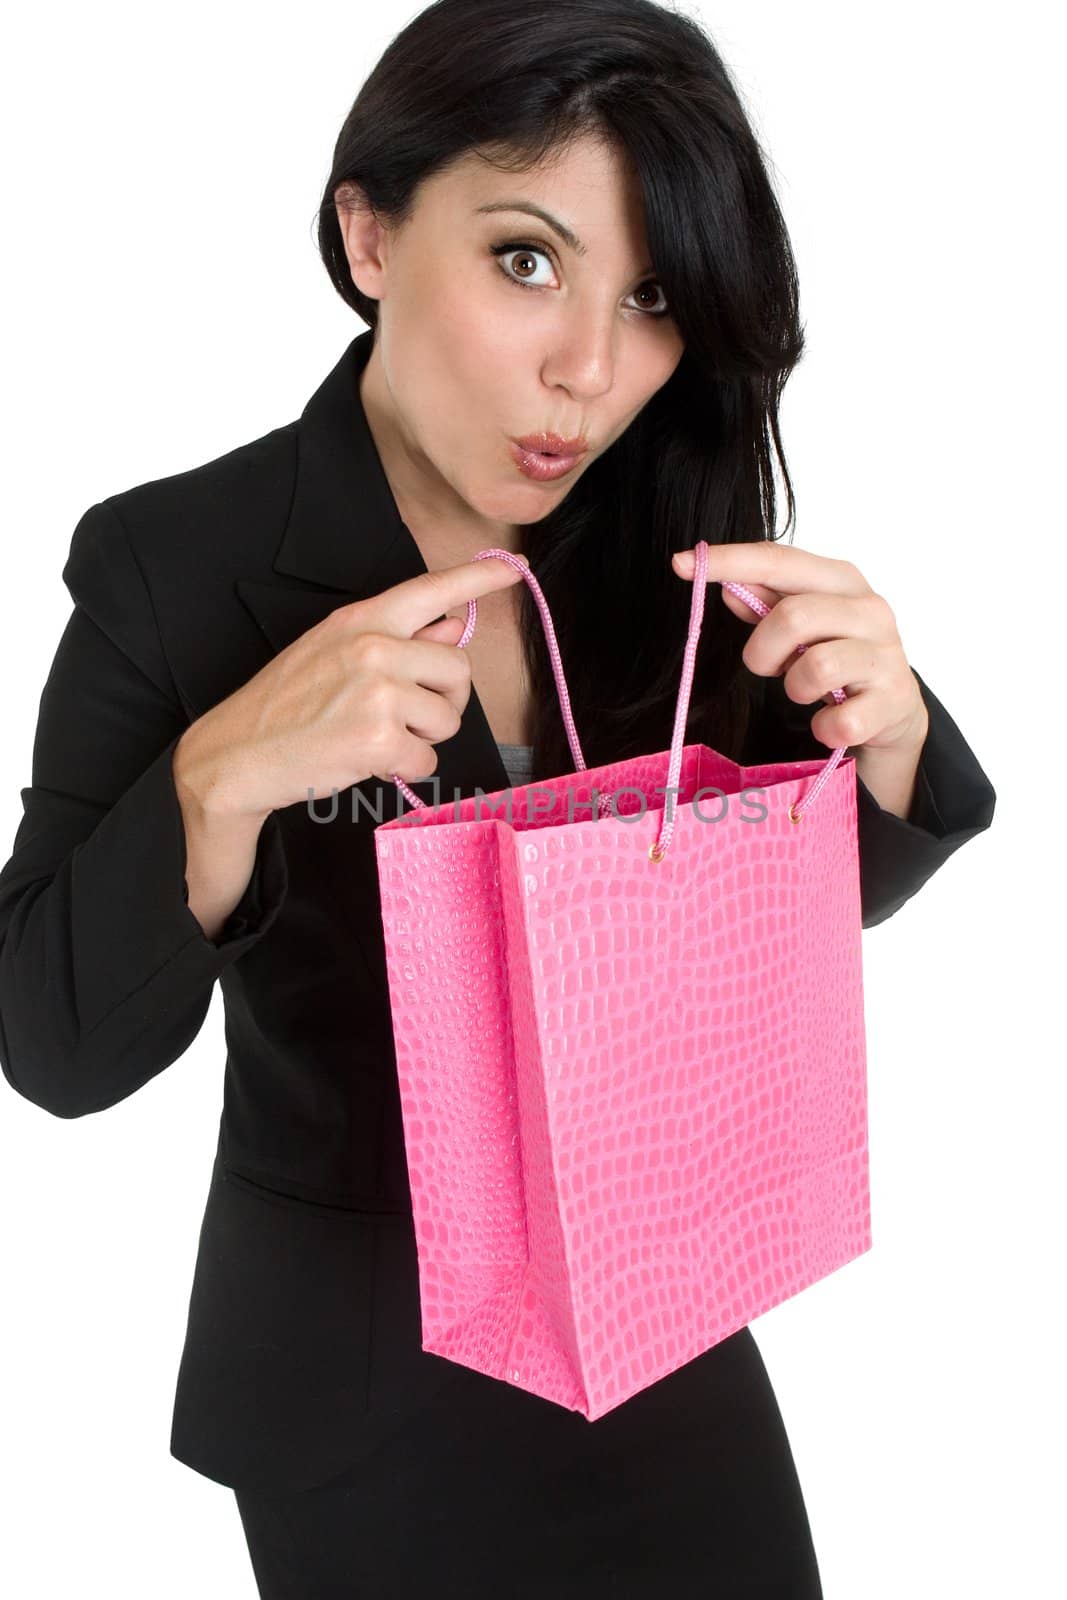 Woman with a boutique shopping bag or gift bag.